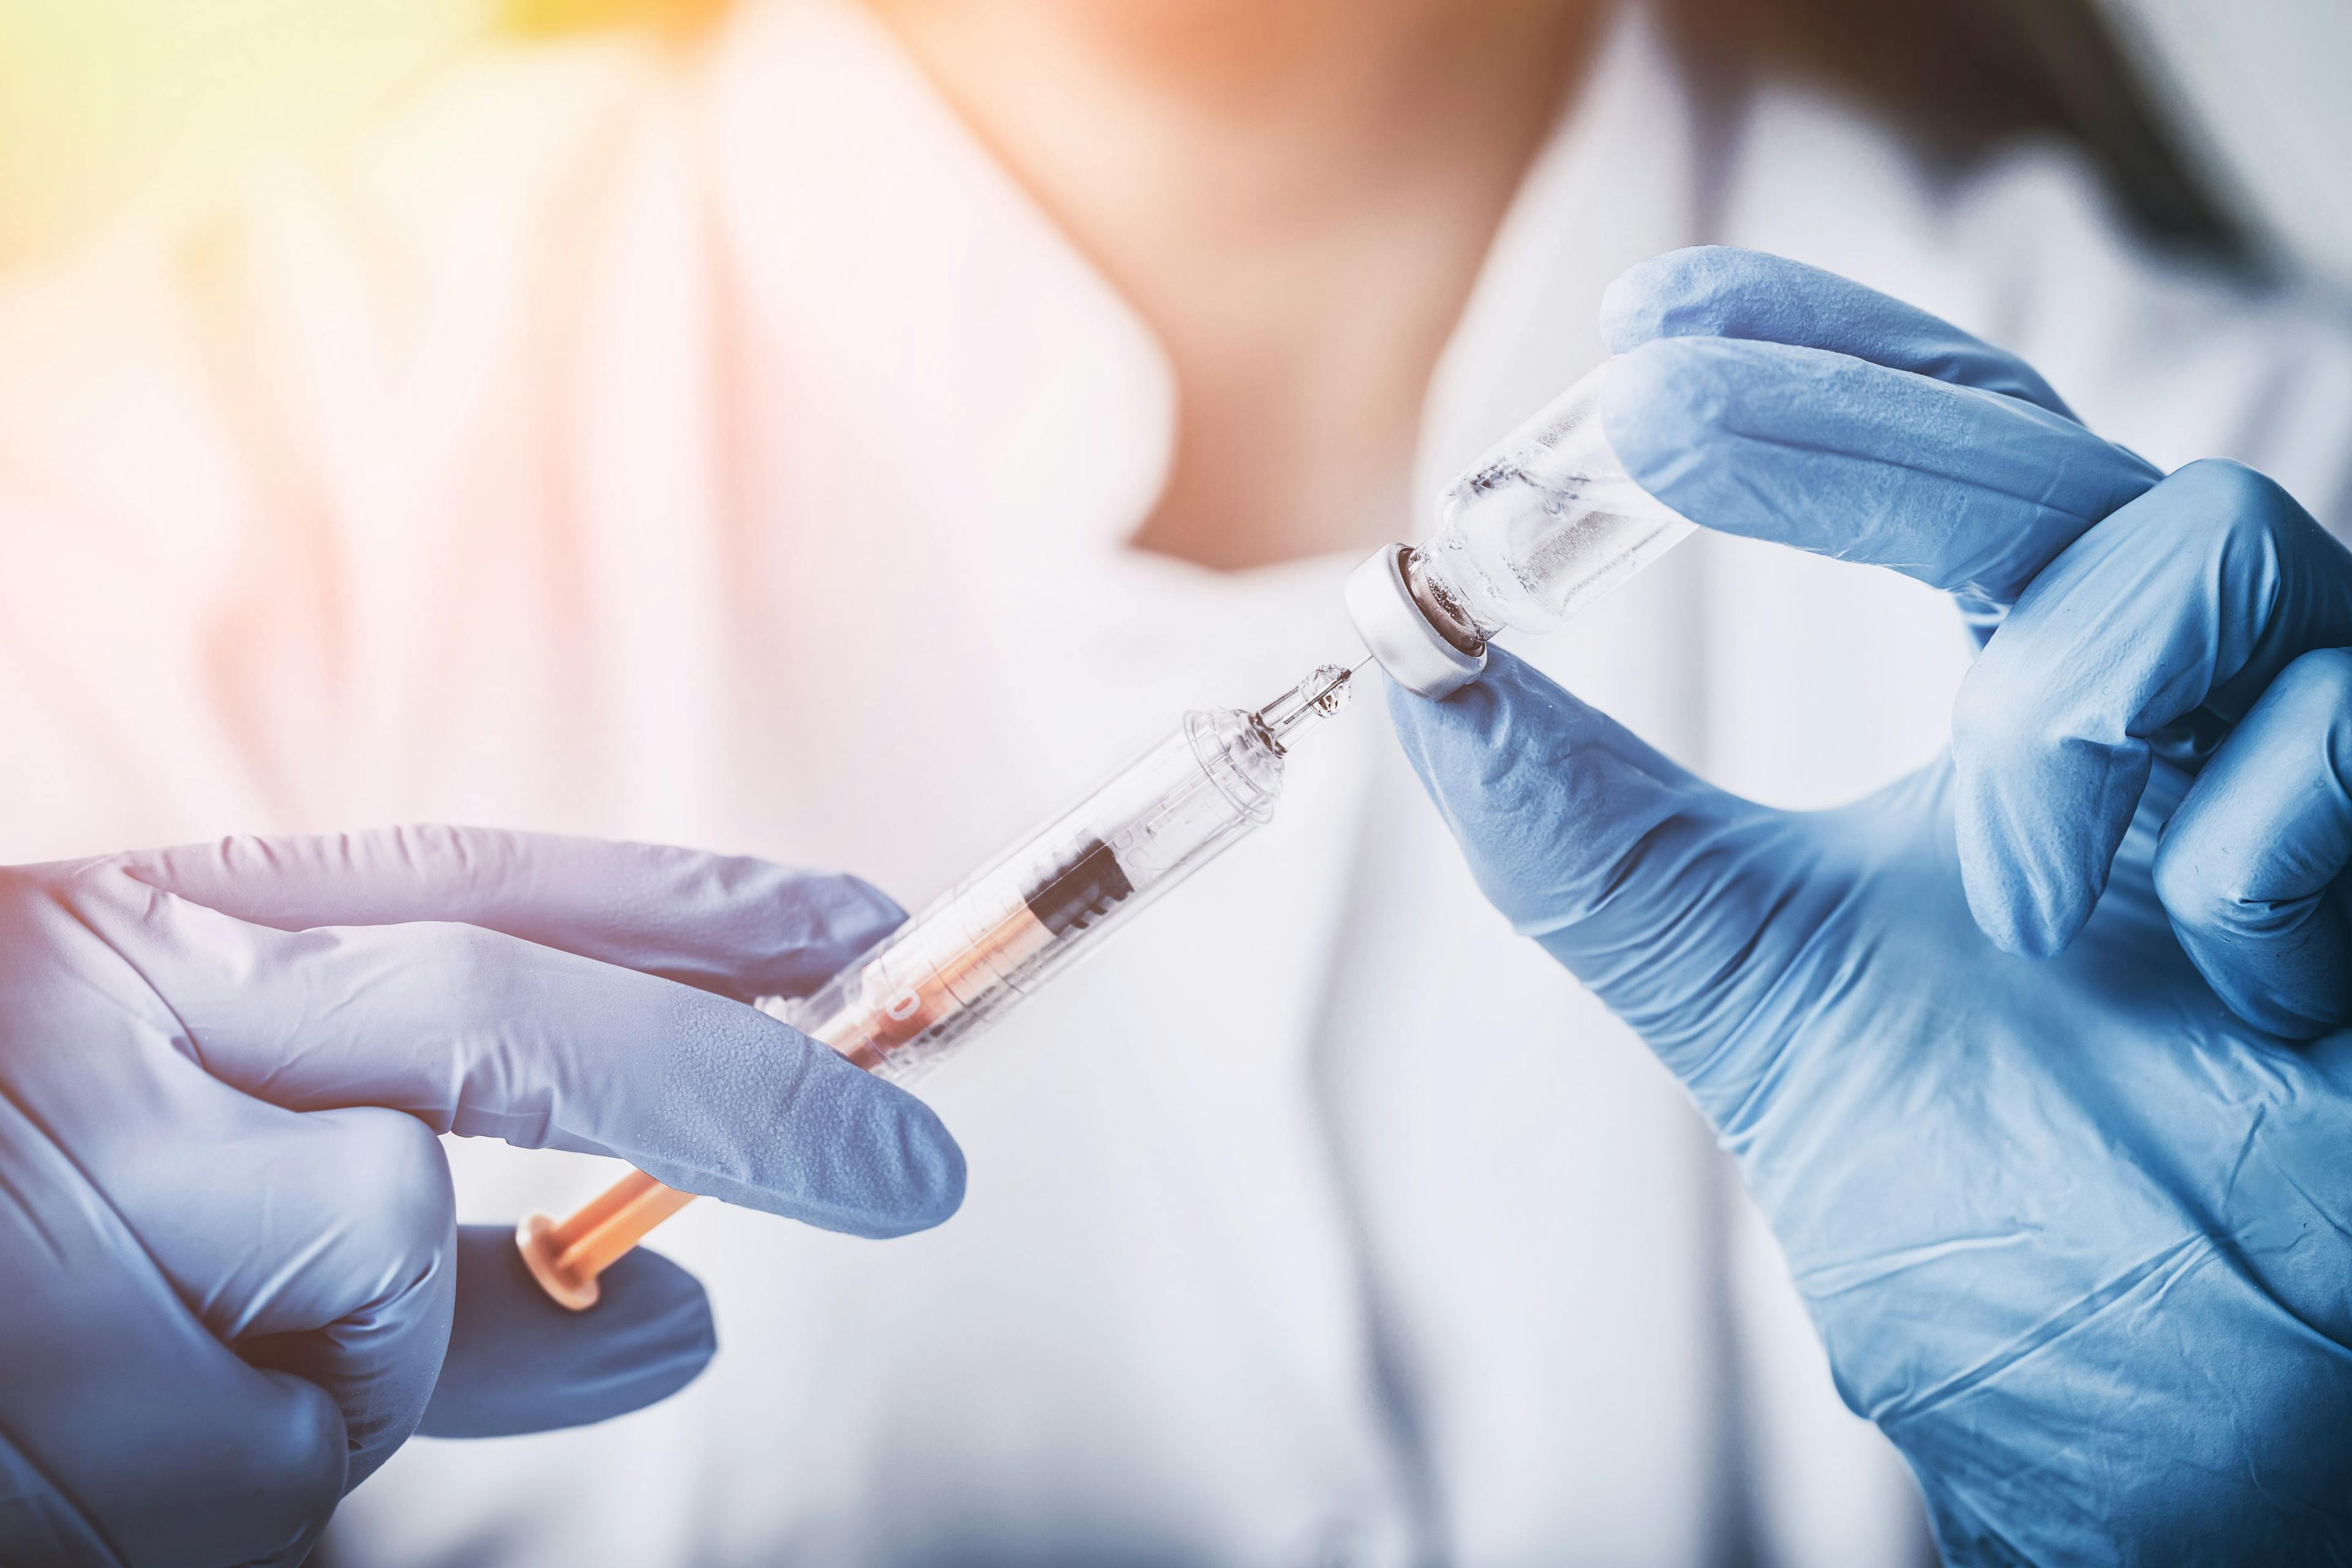 How General Vaccine Hesitancy Is Impacting Teen COVID-19 Vaccination Rates